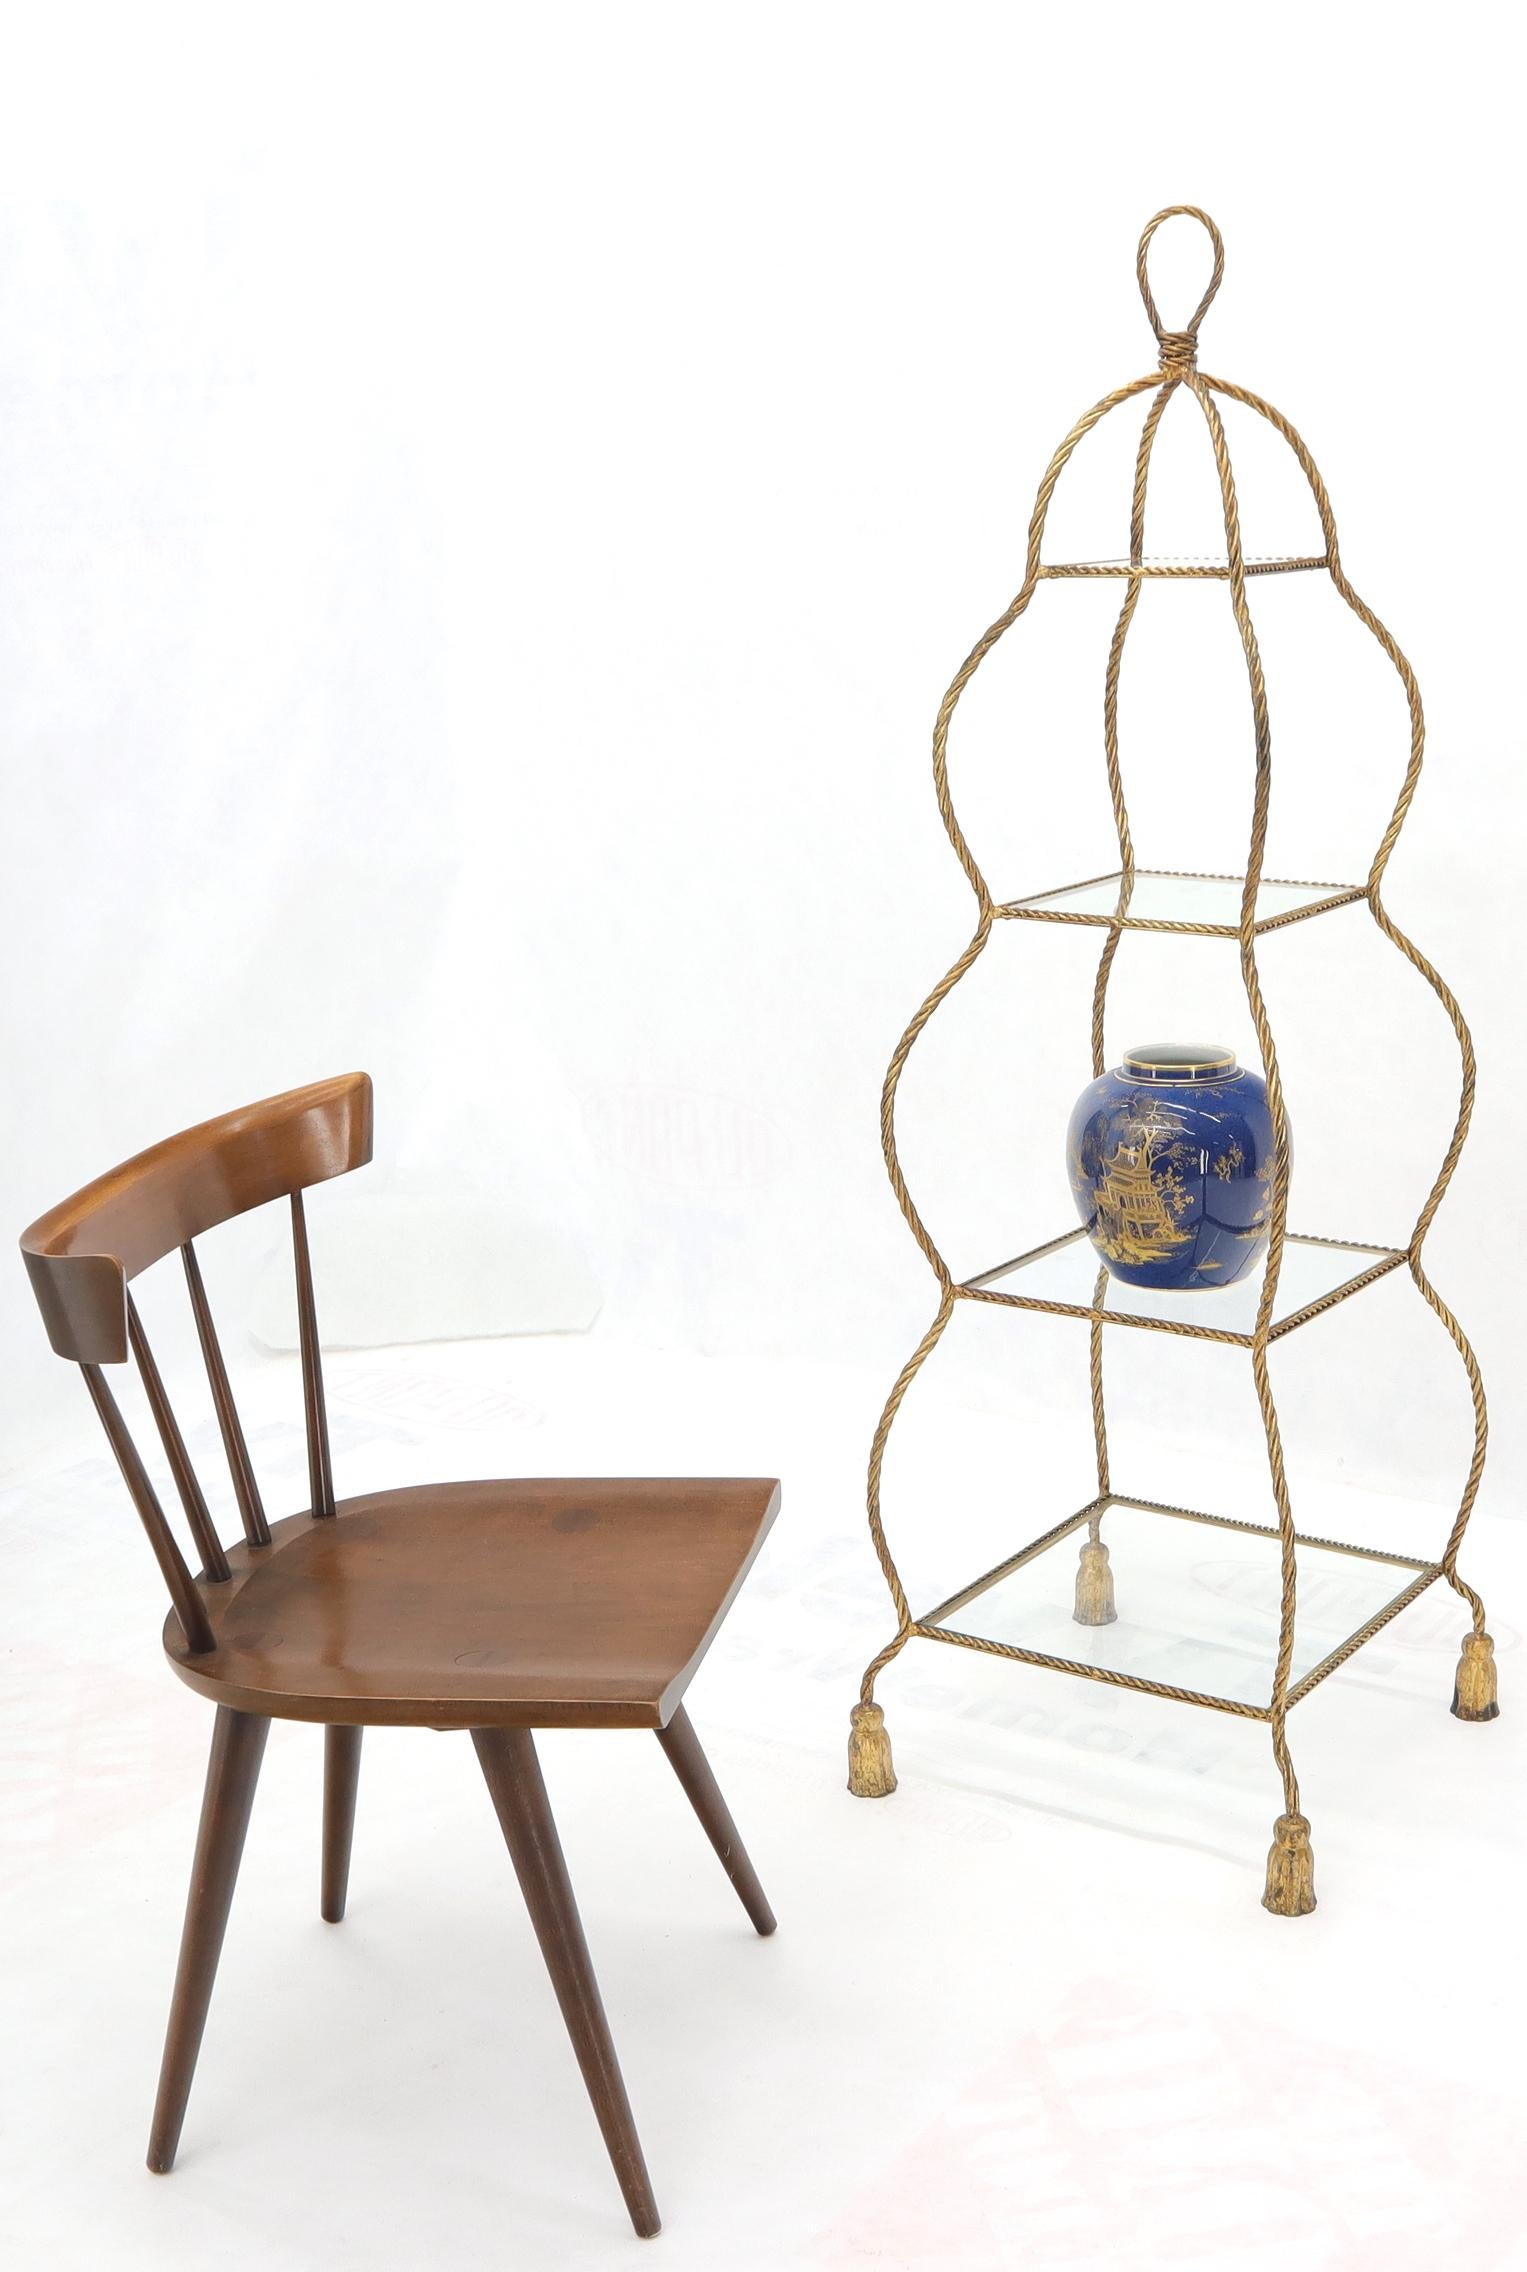 Italian Mid-Century Modern decorative twisted gilt metal rope étagère with glass shelves.